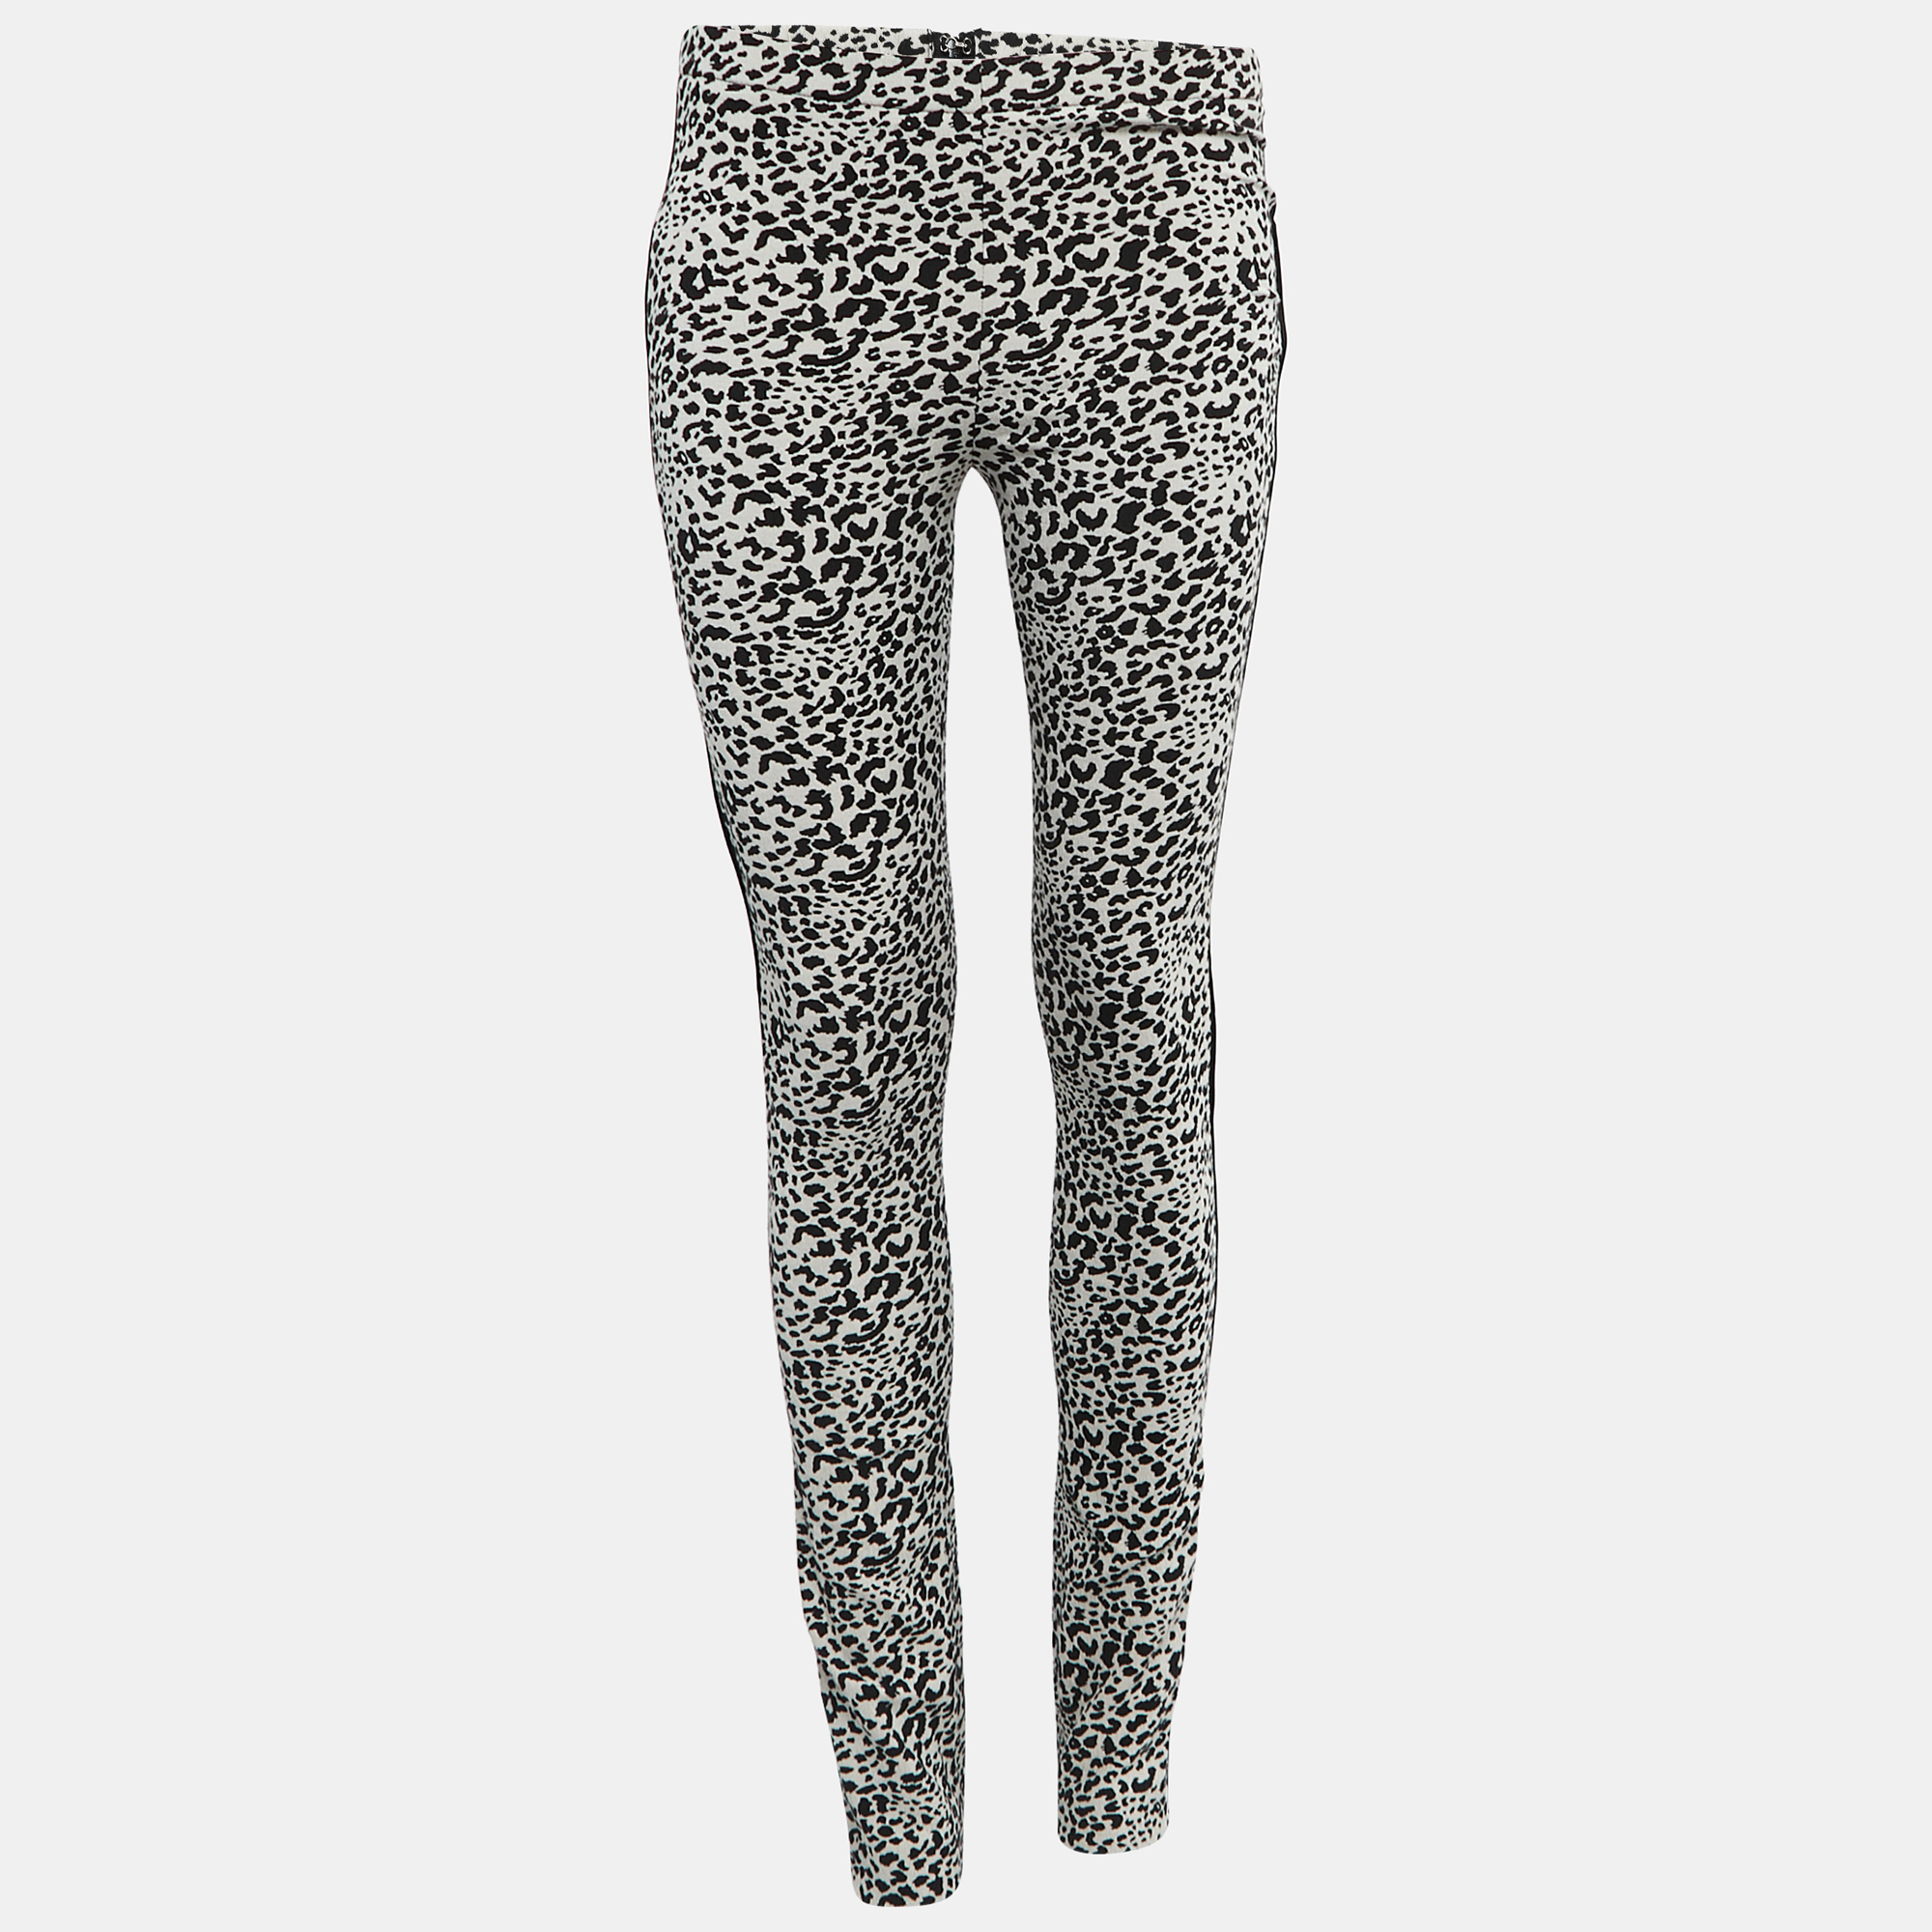 Zadig & Voltaire Black/White Animal Printed Cotton Blend Skinny Pants M